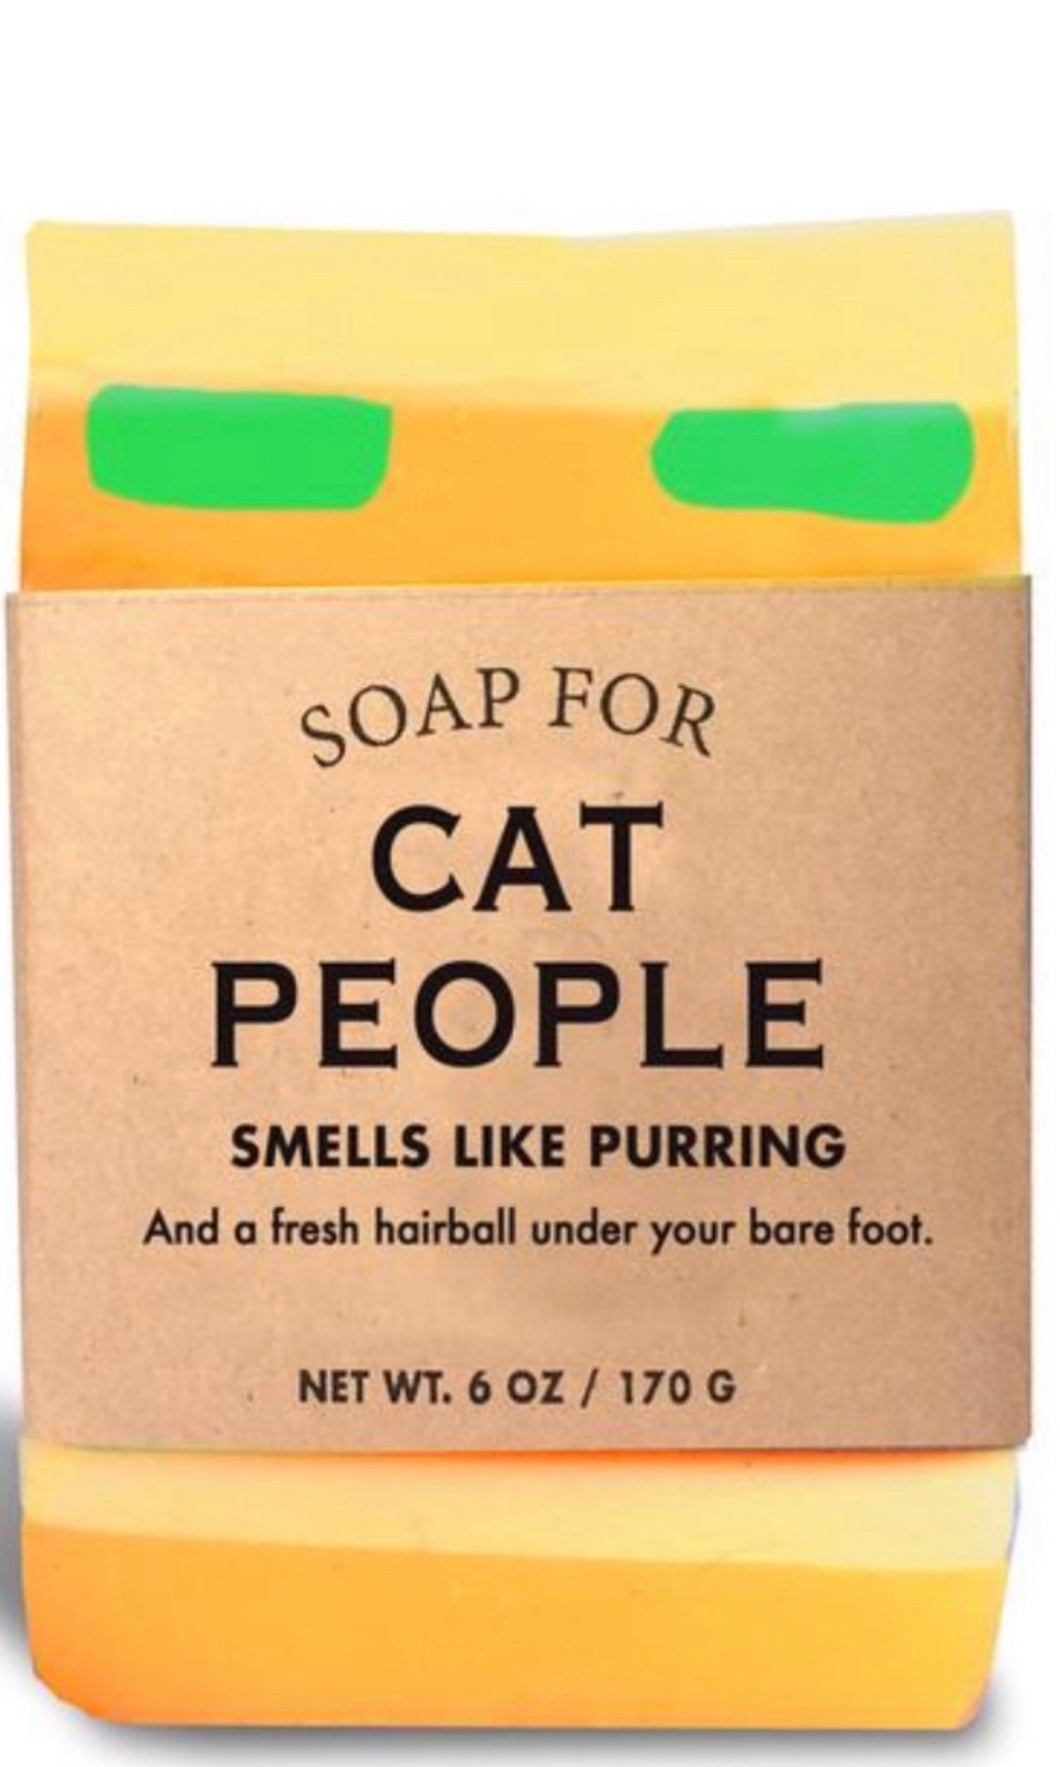 Whisky River Soap for Cat People